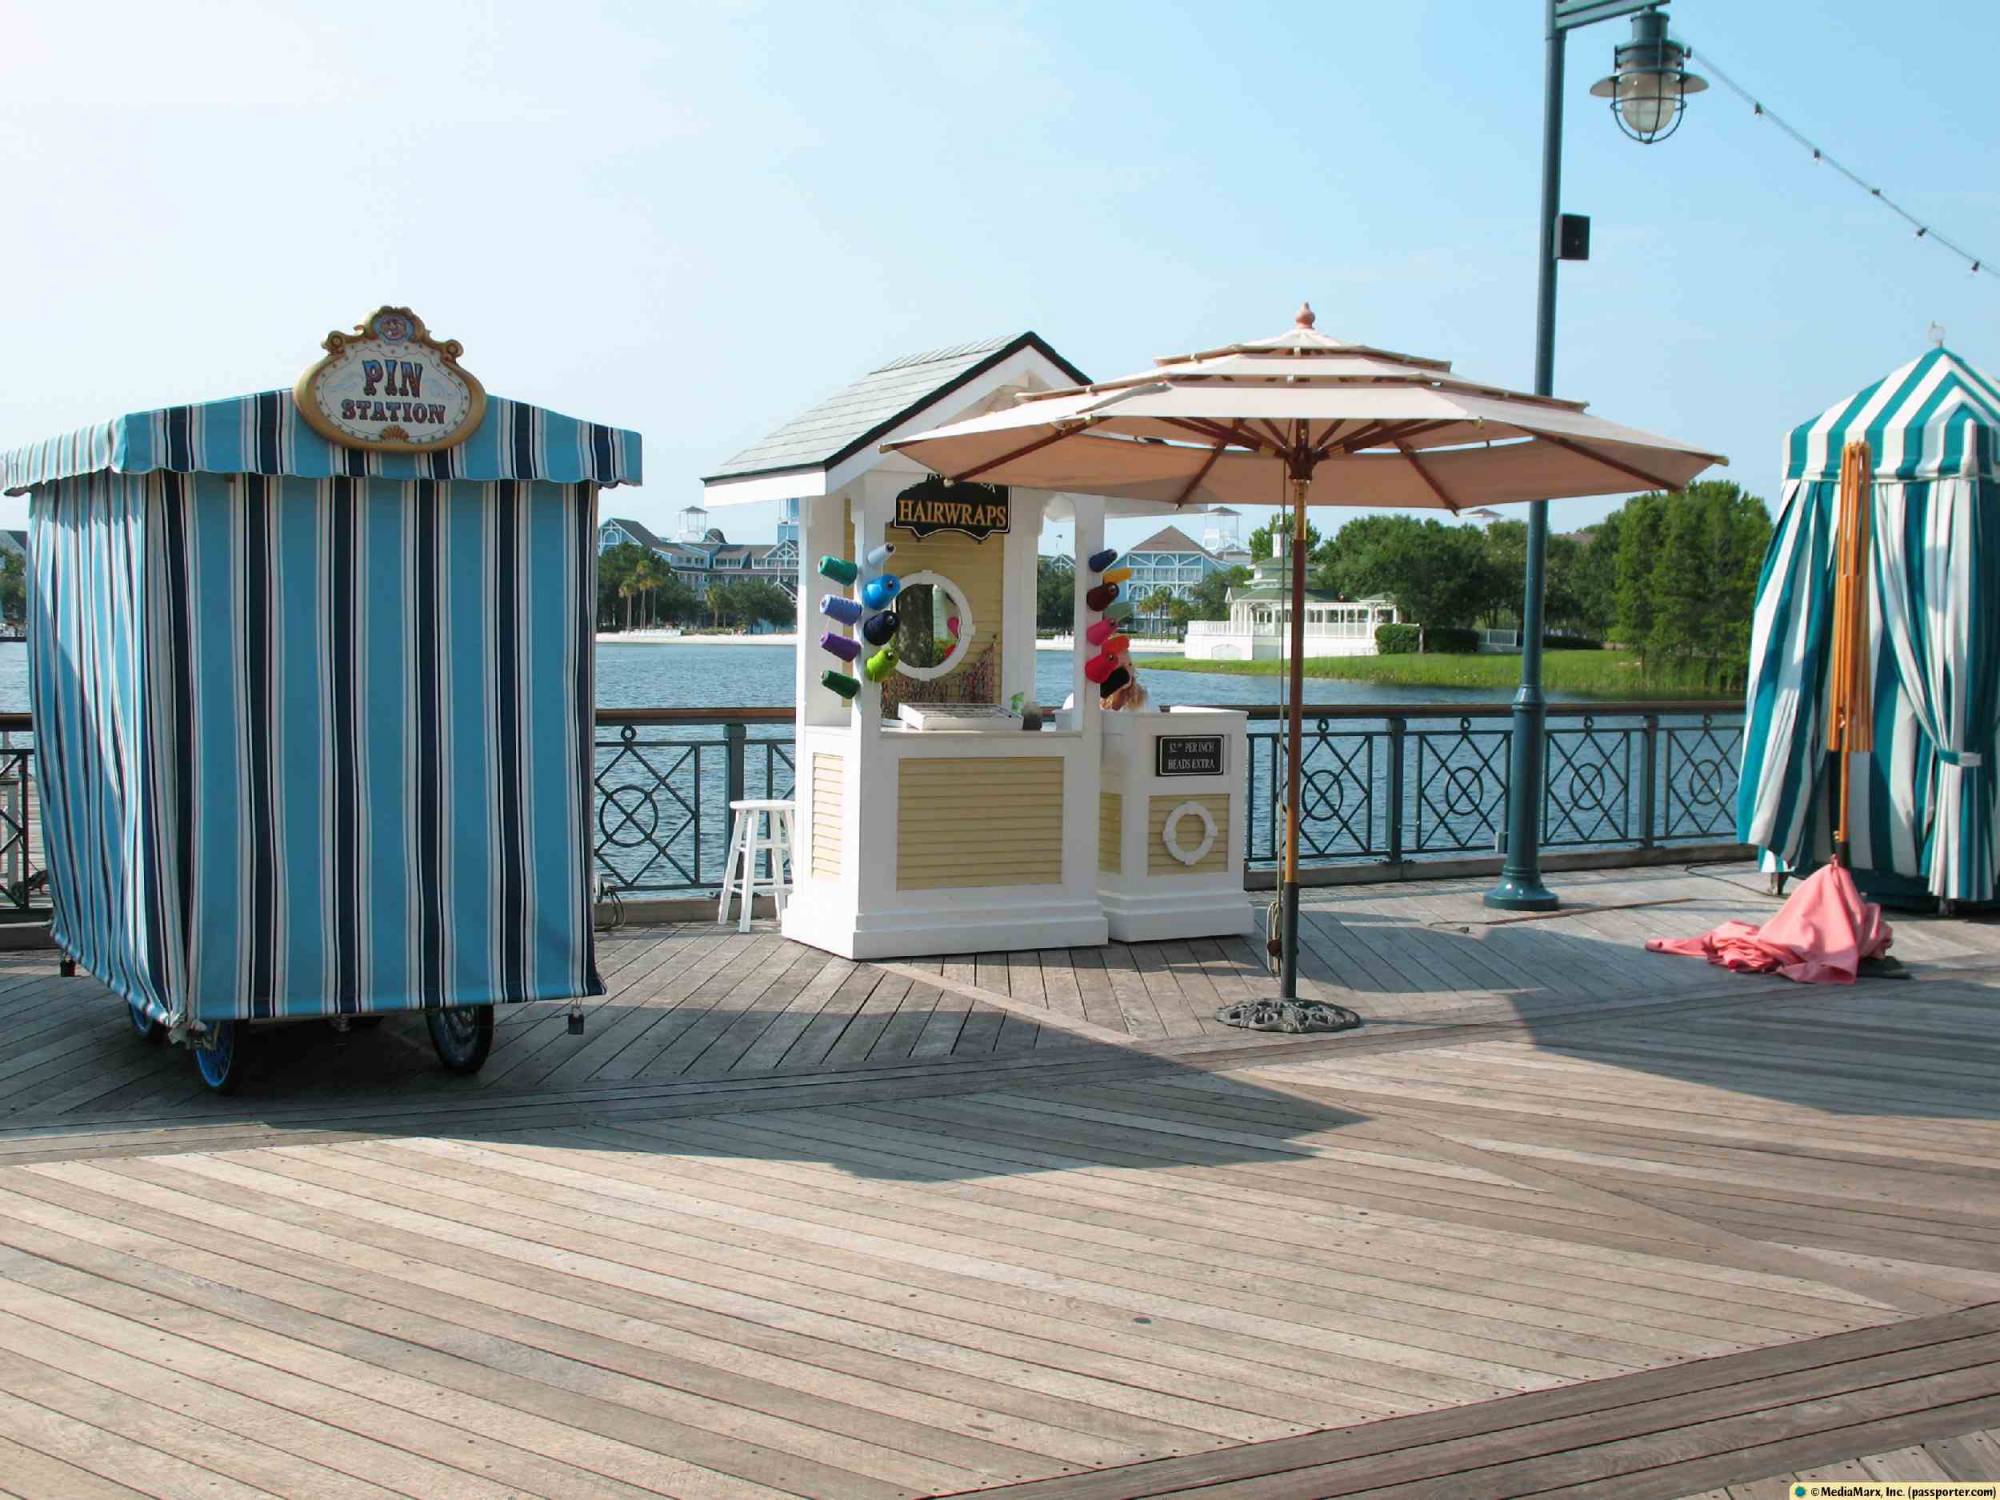 BoardWalk - Hairwraps and Pin Station